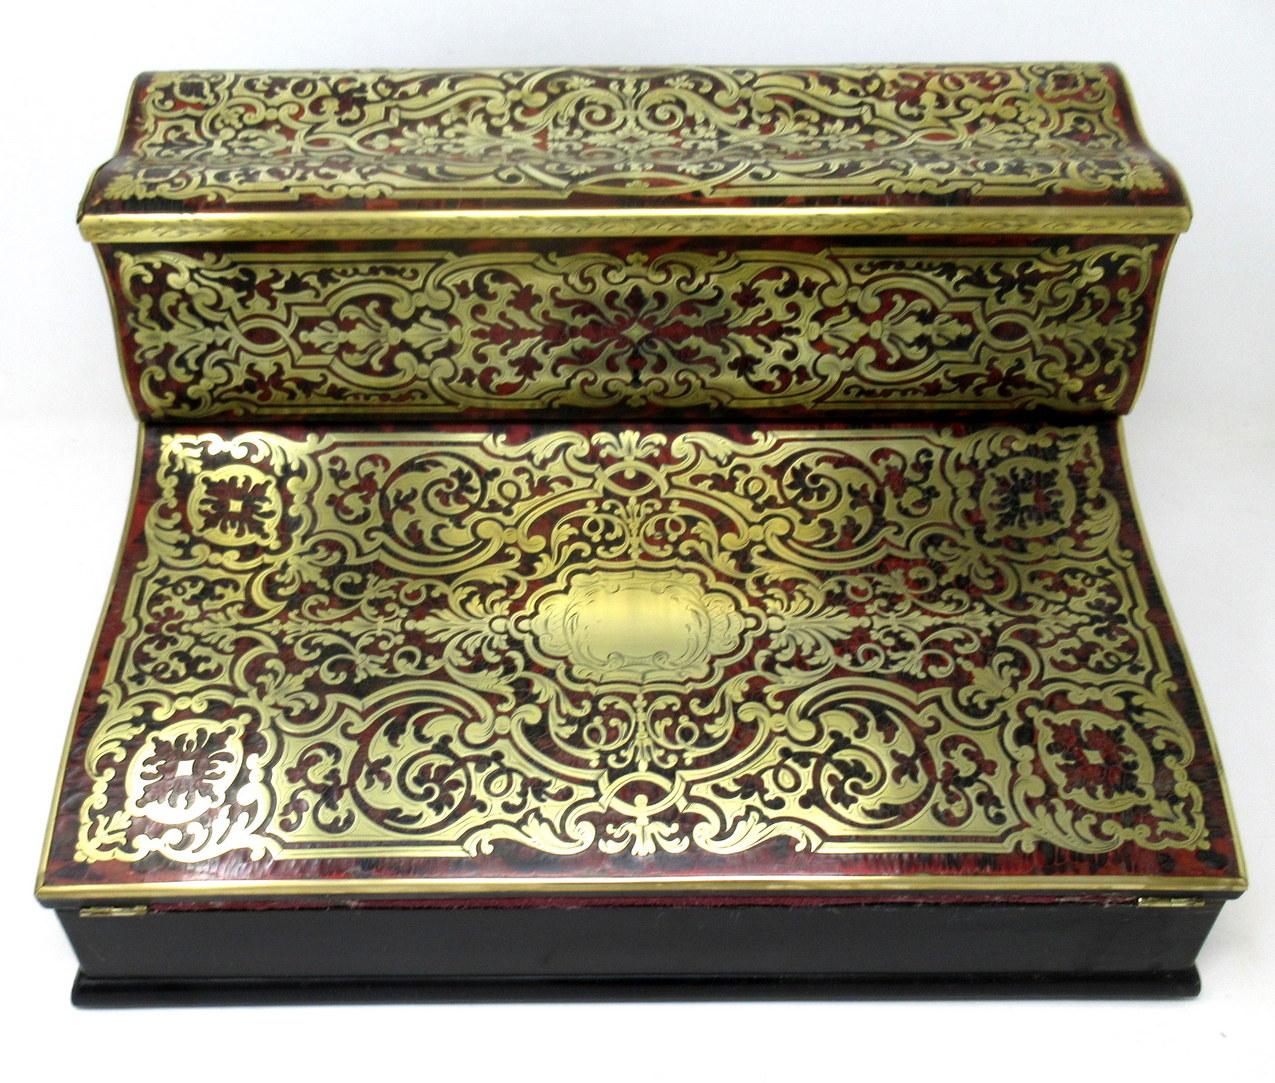 An exceptionally fine quality example of a polished brass, ebony and shell inlaid boulle style travelling writing slope made during the first half of the nineteenth century, of French origin. 

The entire top area decorated with premier and